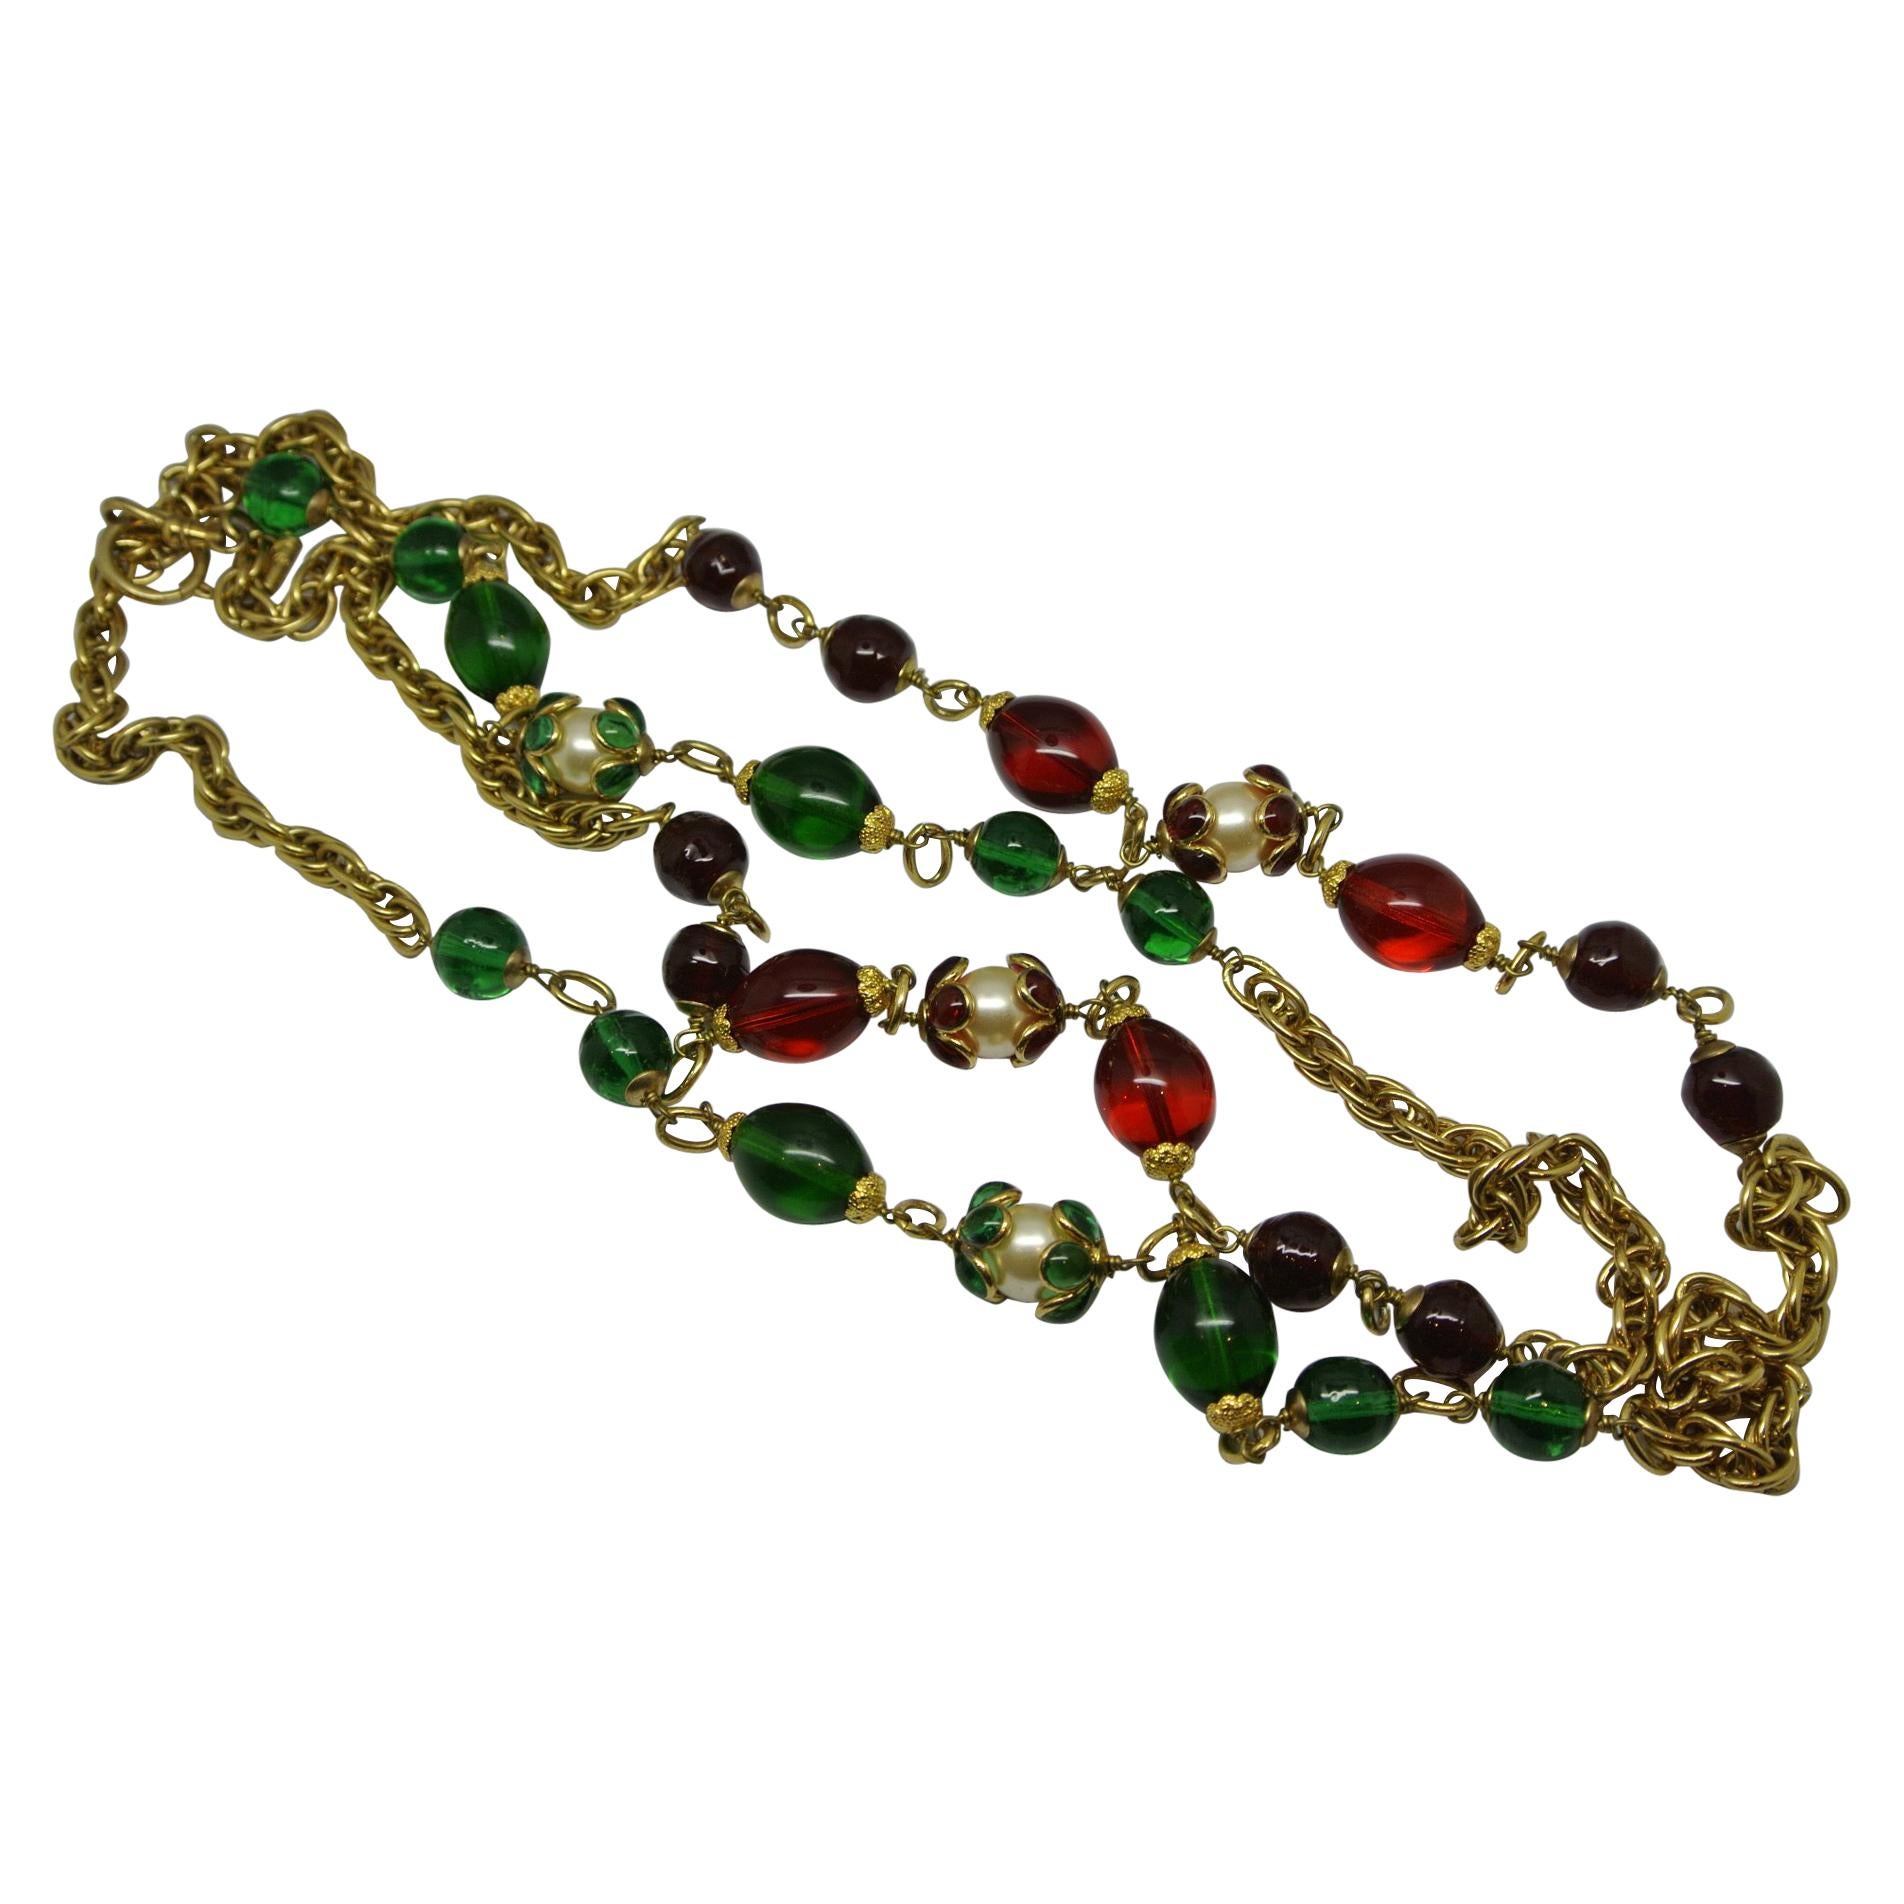 Chanel green red gripoix poured glass flower capped faux pearl chain necklace